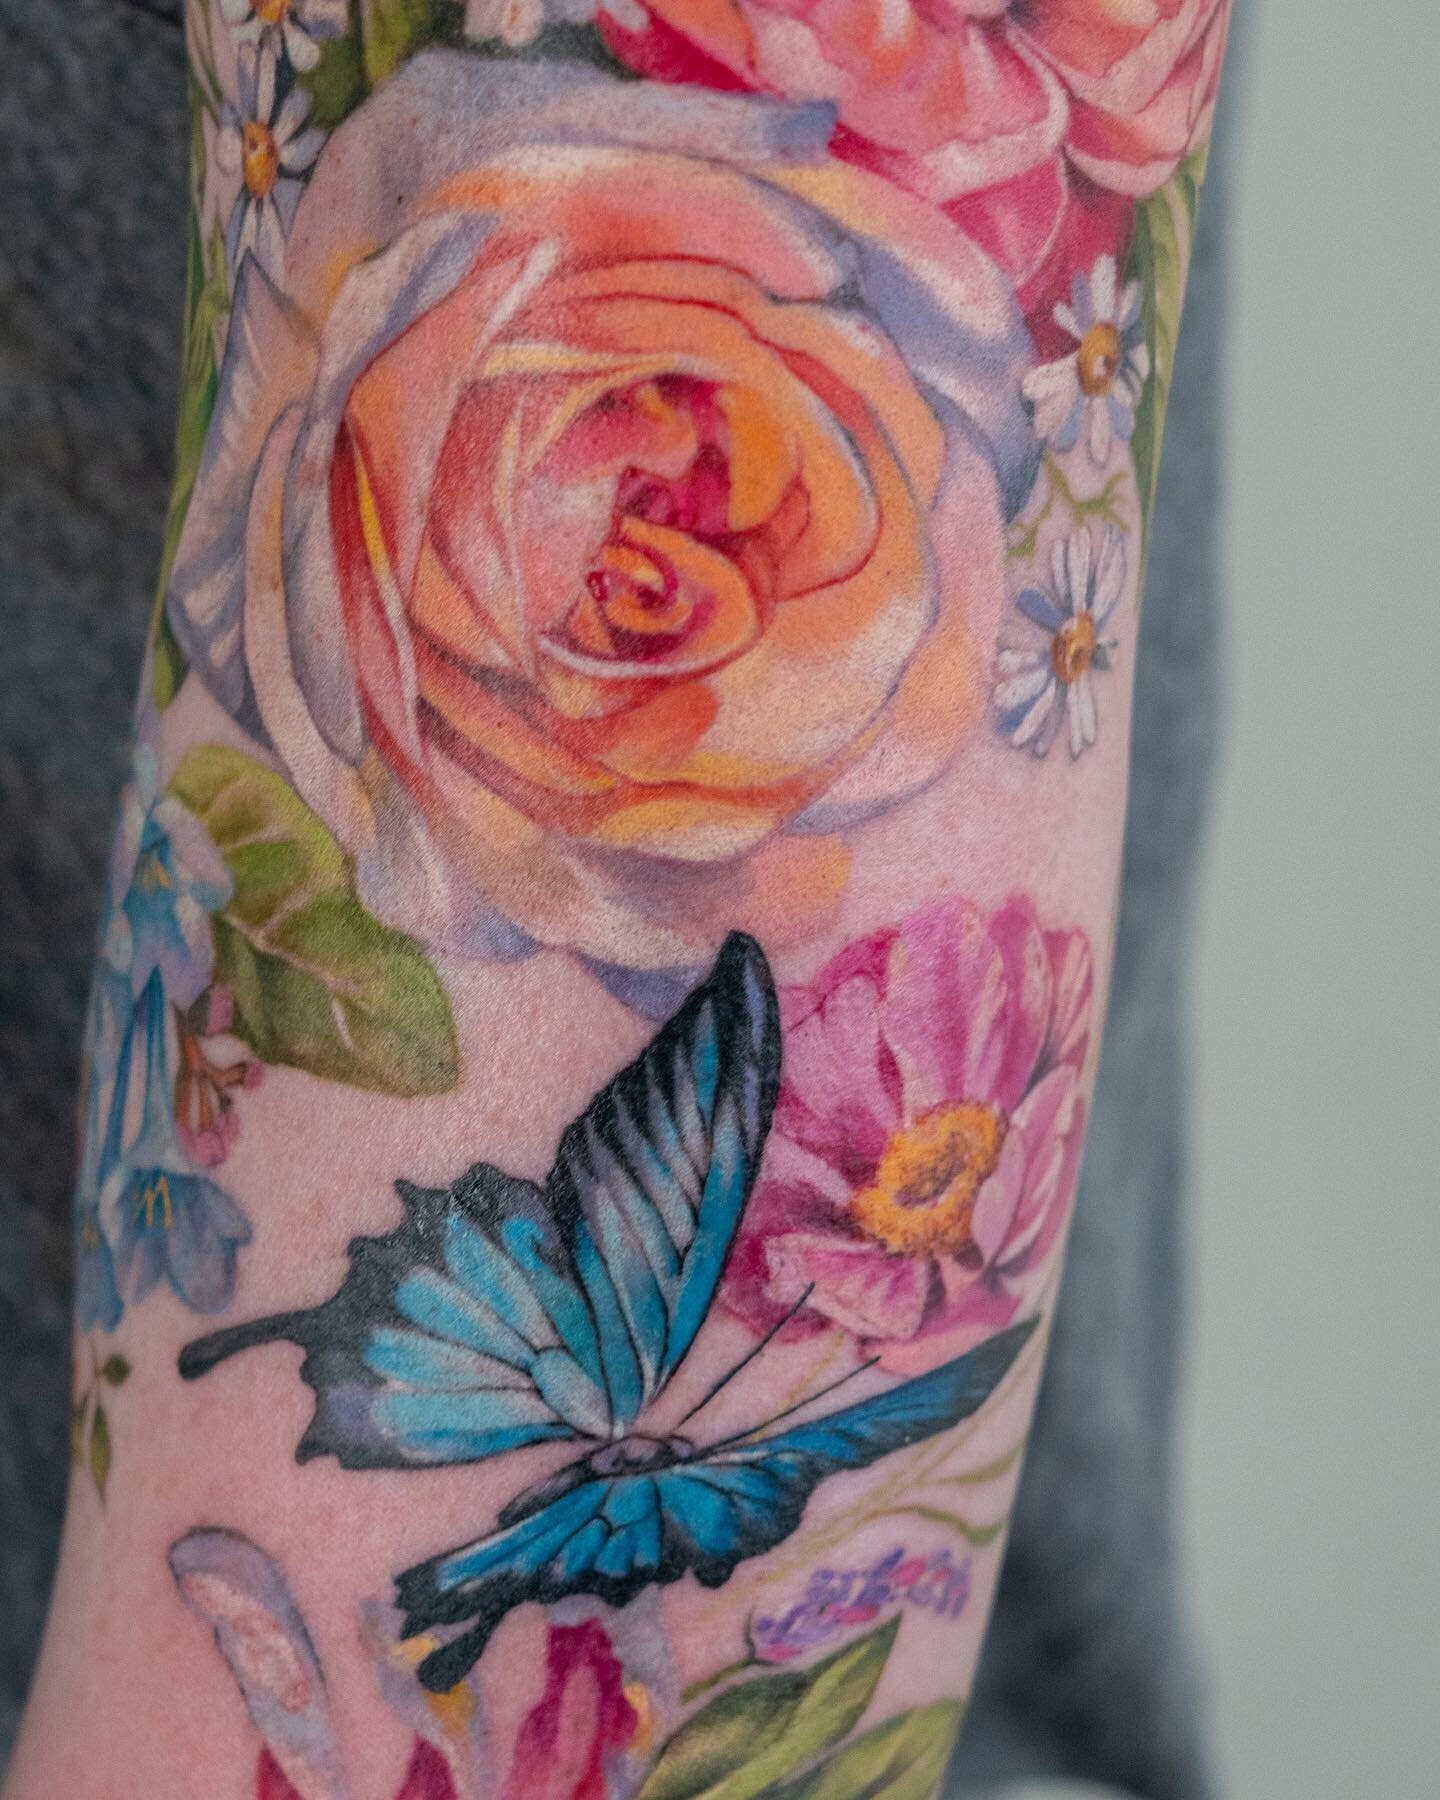 Part of the floral sleeve for Addison.
Can&rsquo;t wait to Finnish this project !
.
.
.
.
.
.
.
#florattattoo #botanicaltattoo #floralsleeve #rosetattoo #butterflytattoo #flowerstattoo #inked #tattoooftheday #botanicalart #tattooideas #sleevetattoo #